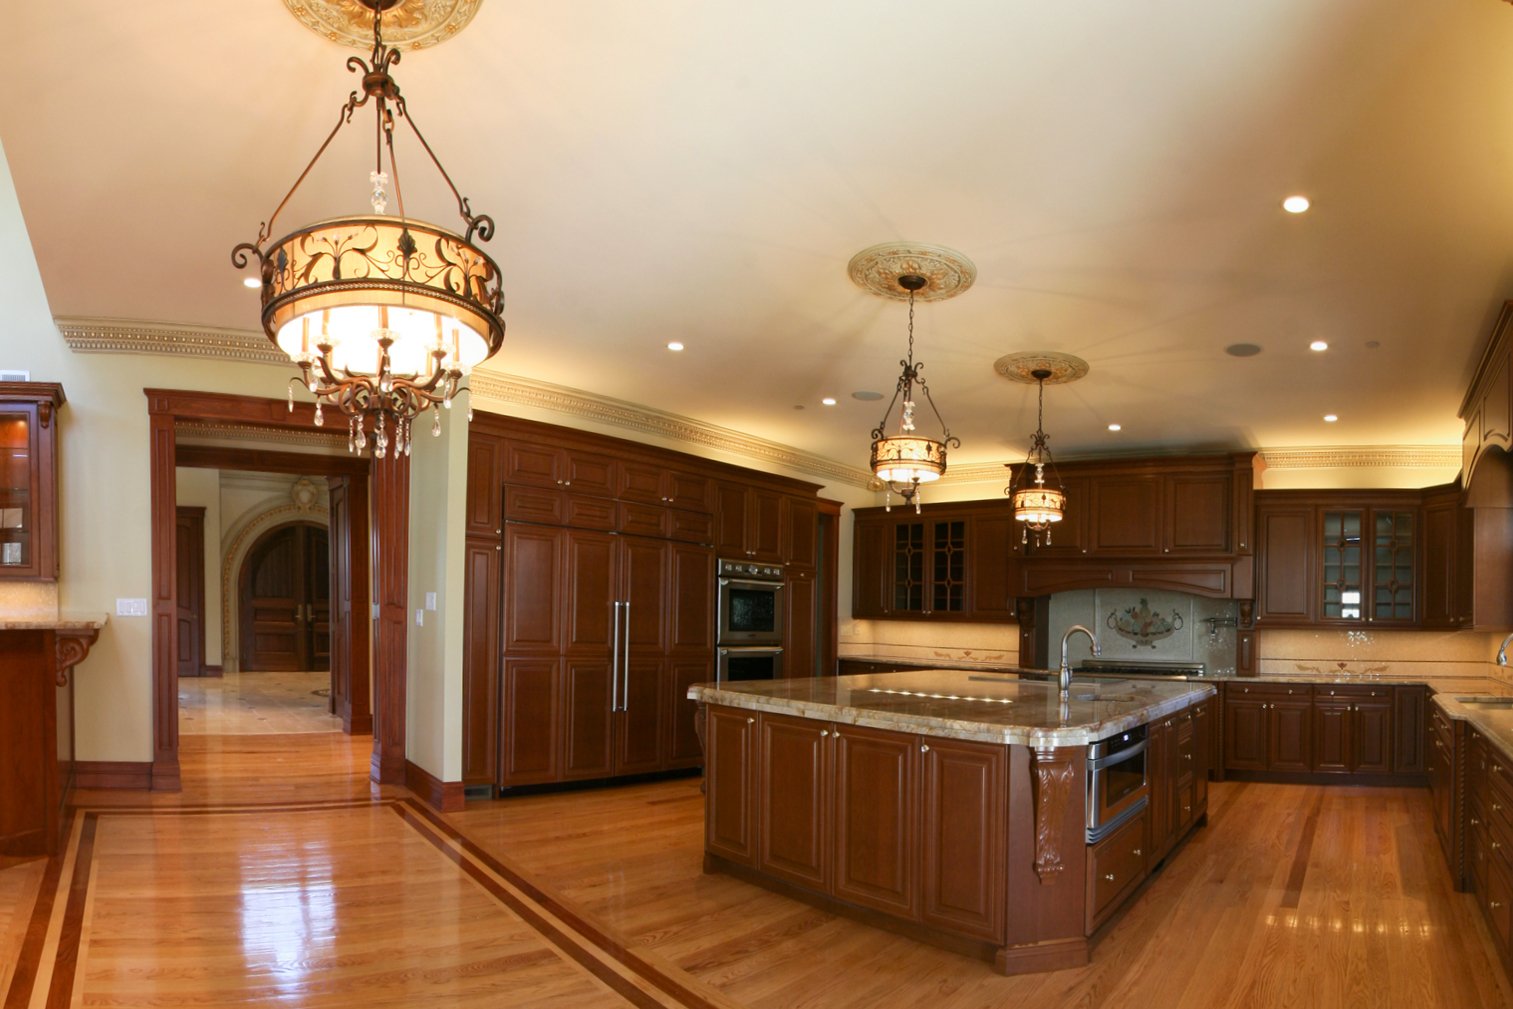 Kitchen - Navajo Ave., Lincolnwood, IL Custom Home. America's Custom Home Builders: New Construction, Remodeling, Restoration Services. Residential and Commercial.